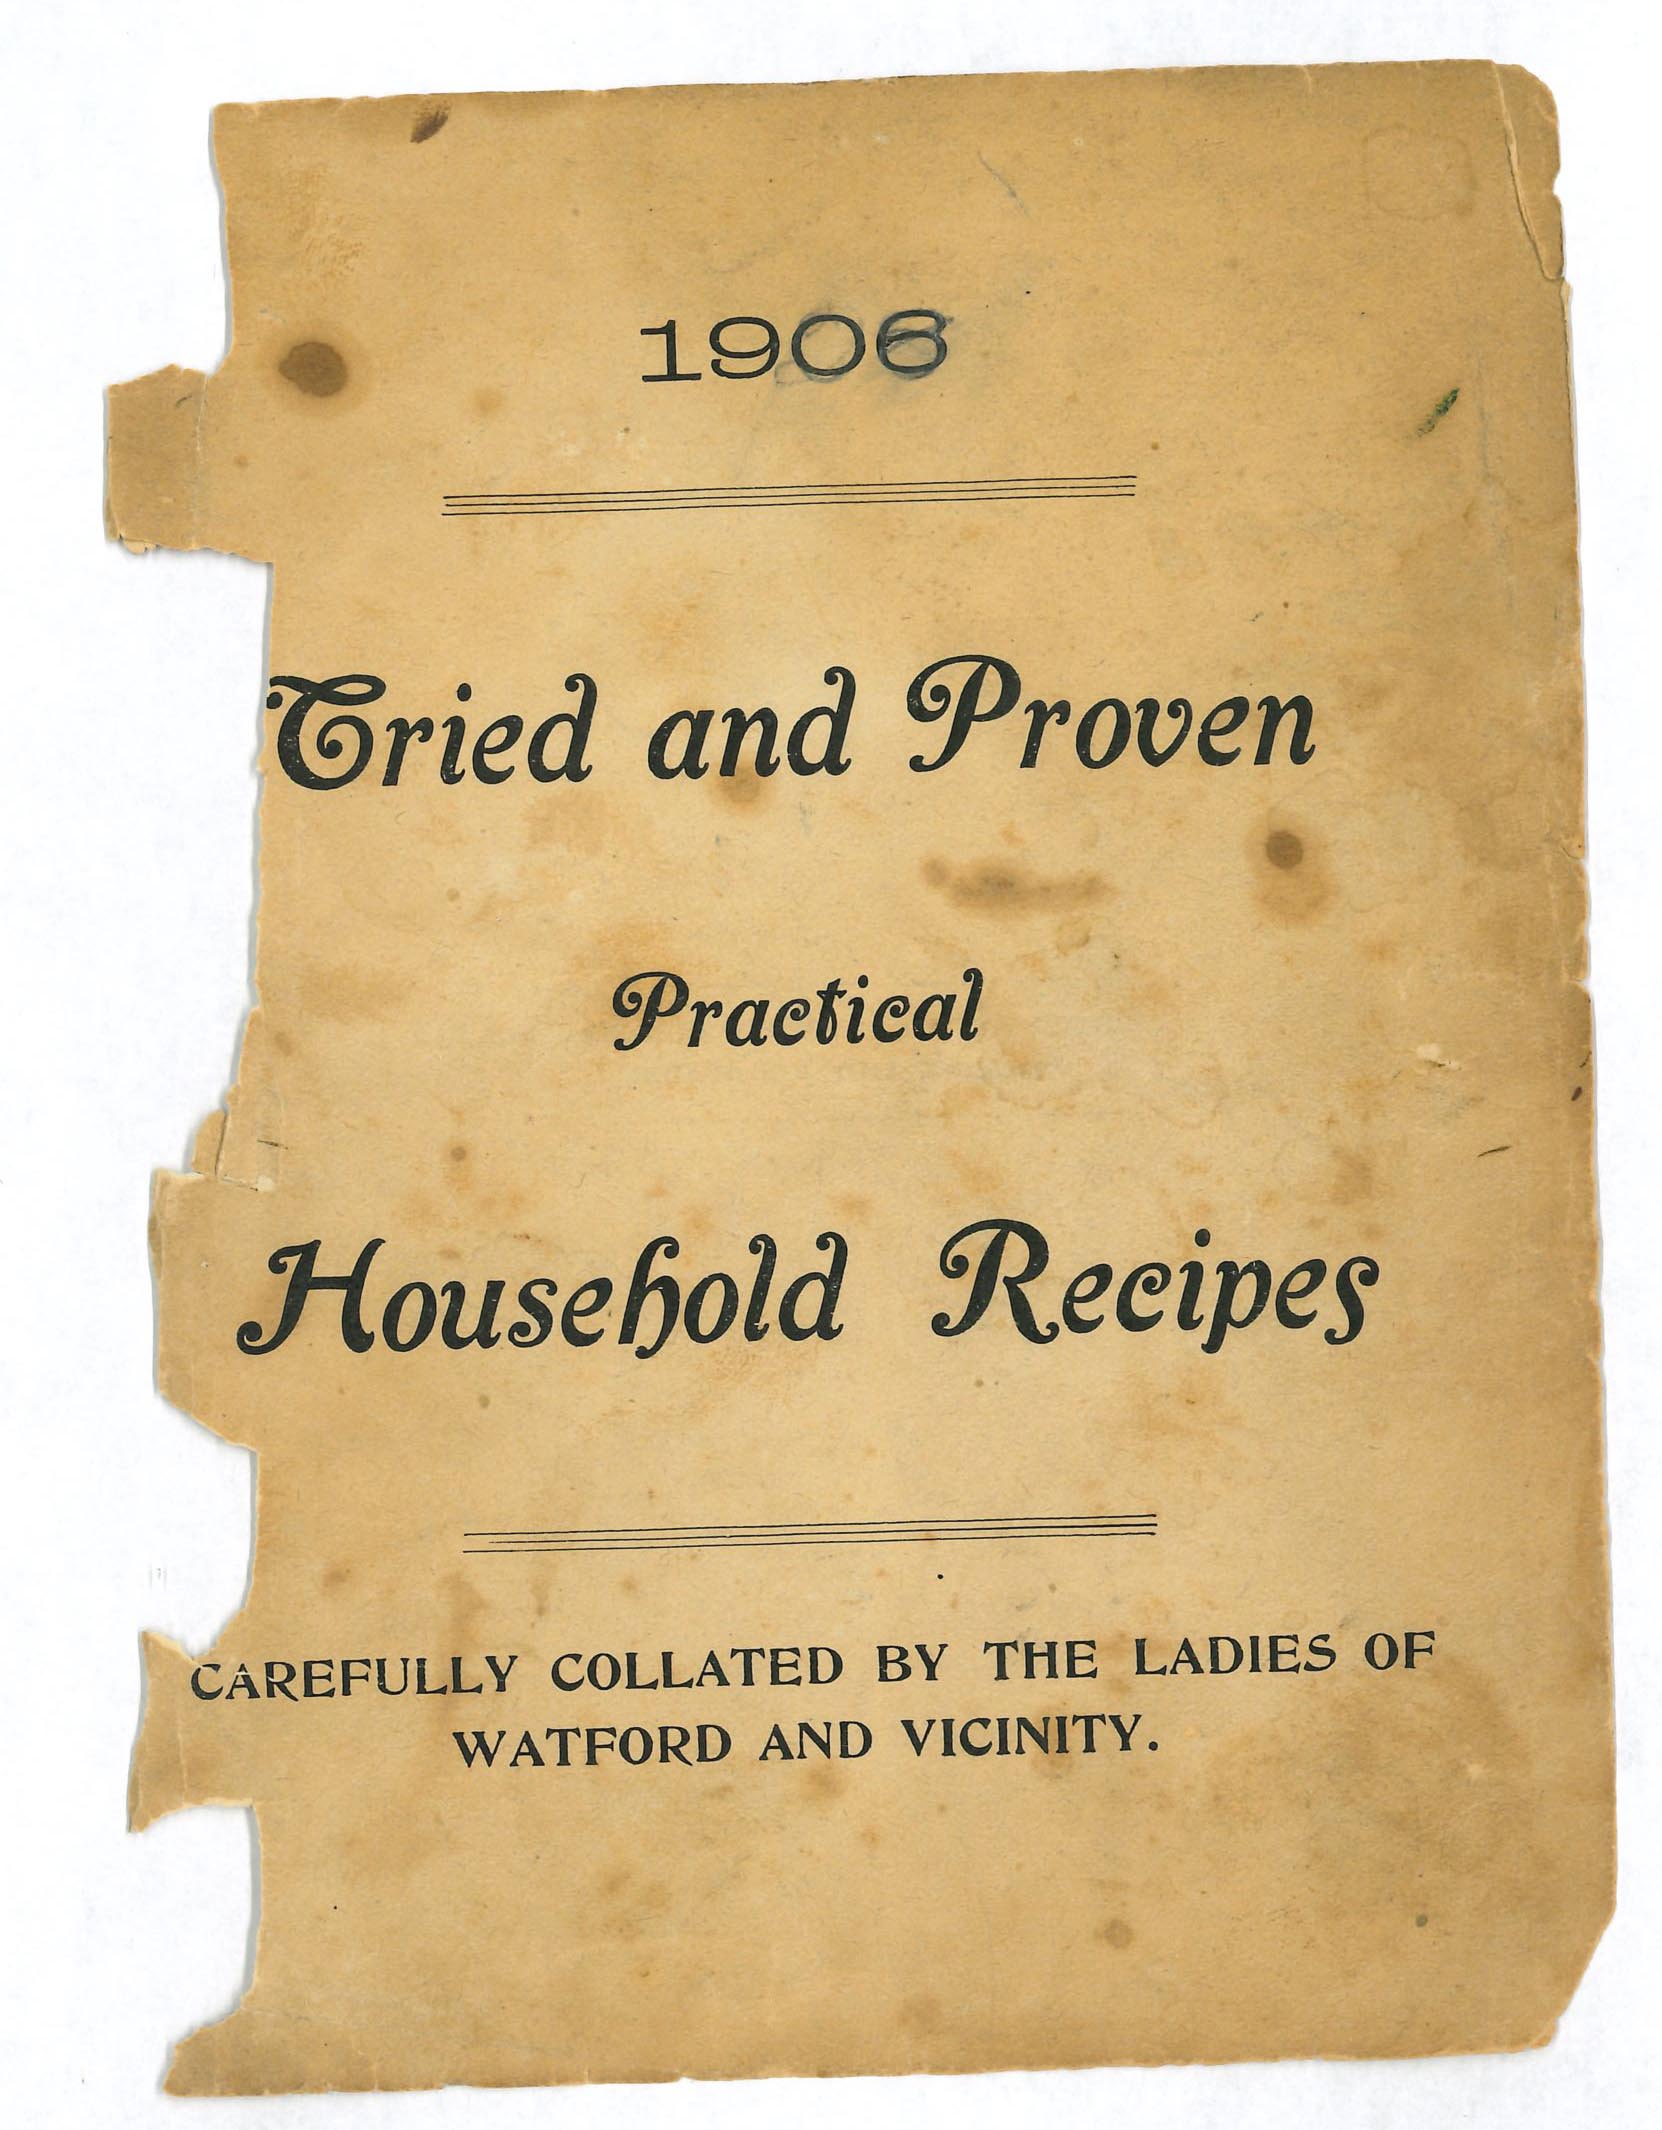 Recipe page from "1096 - Tried and Proven Practical Household Recipes"